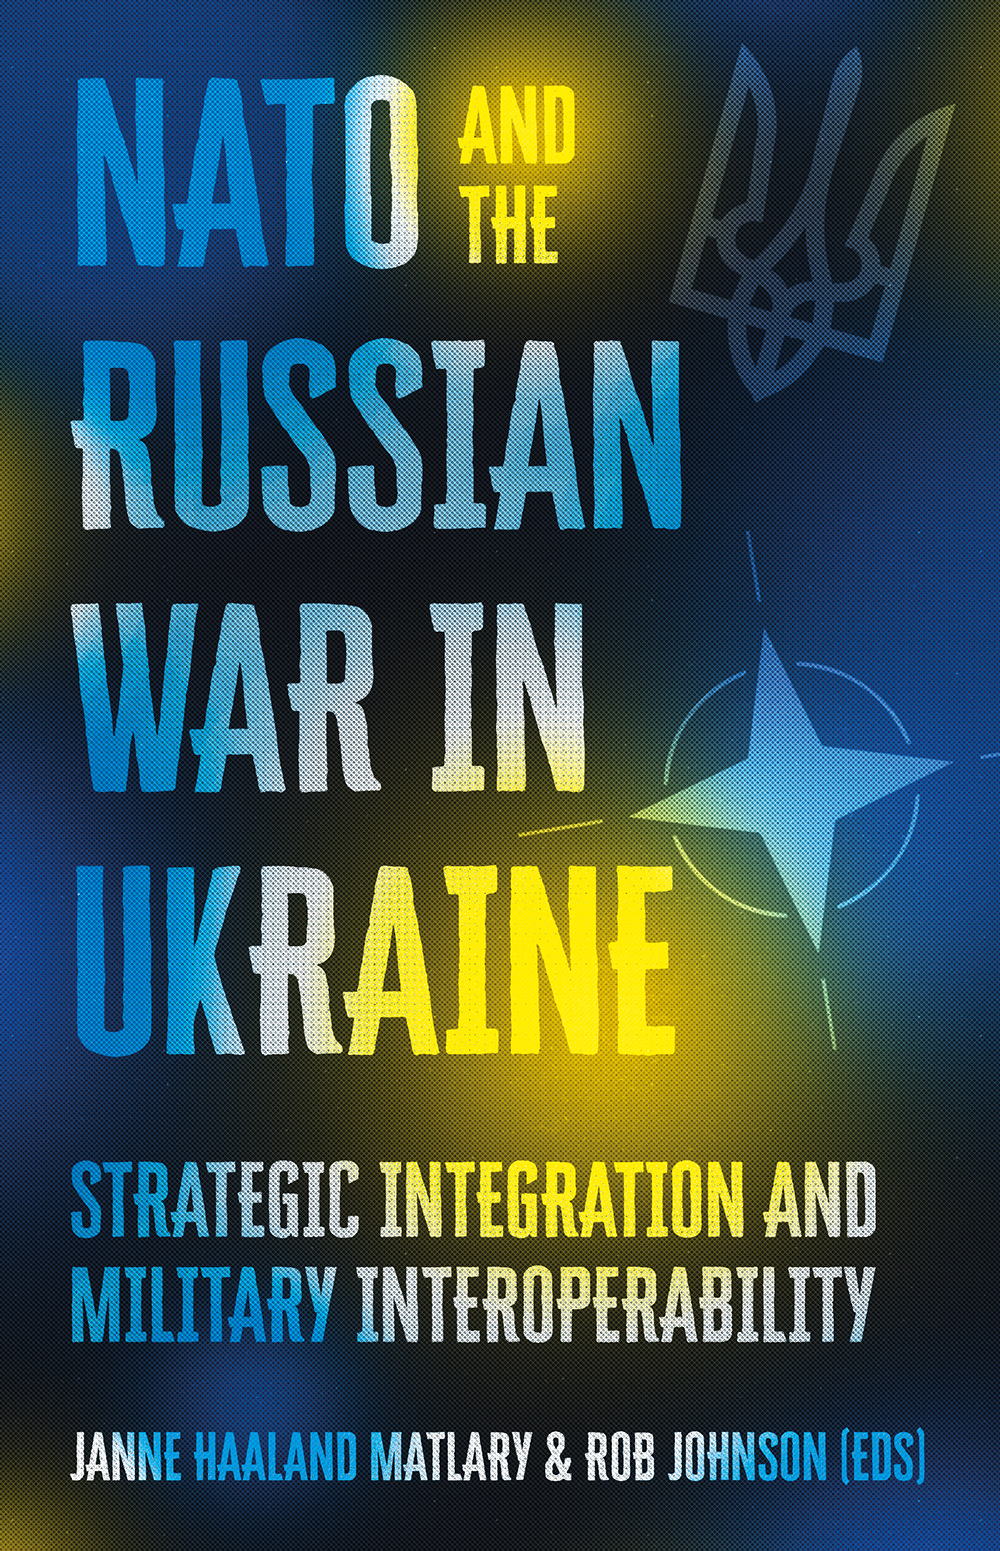 book cover image with NATO logo